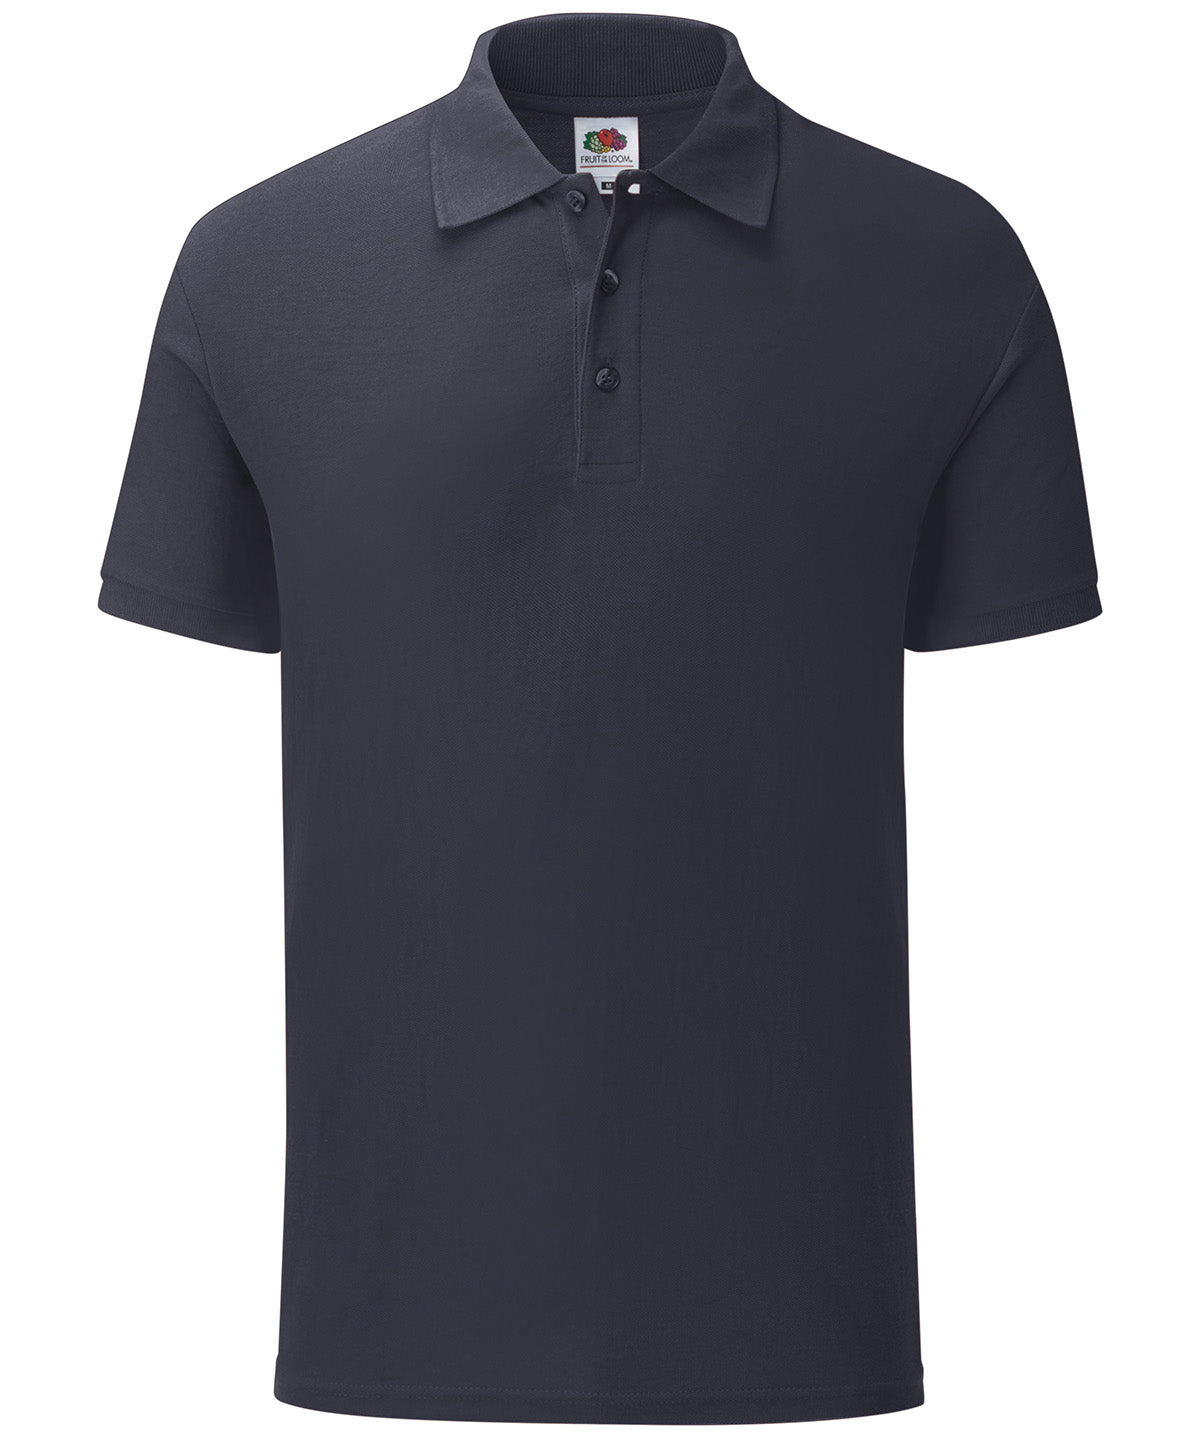 Personalised Polo Shirts - Black Fruit of the Loom Iconic polo